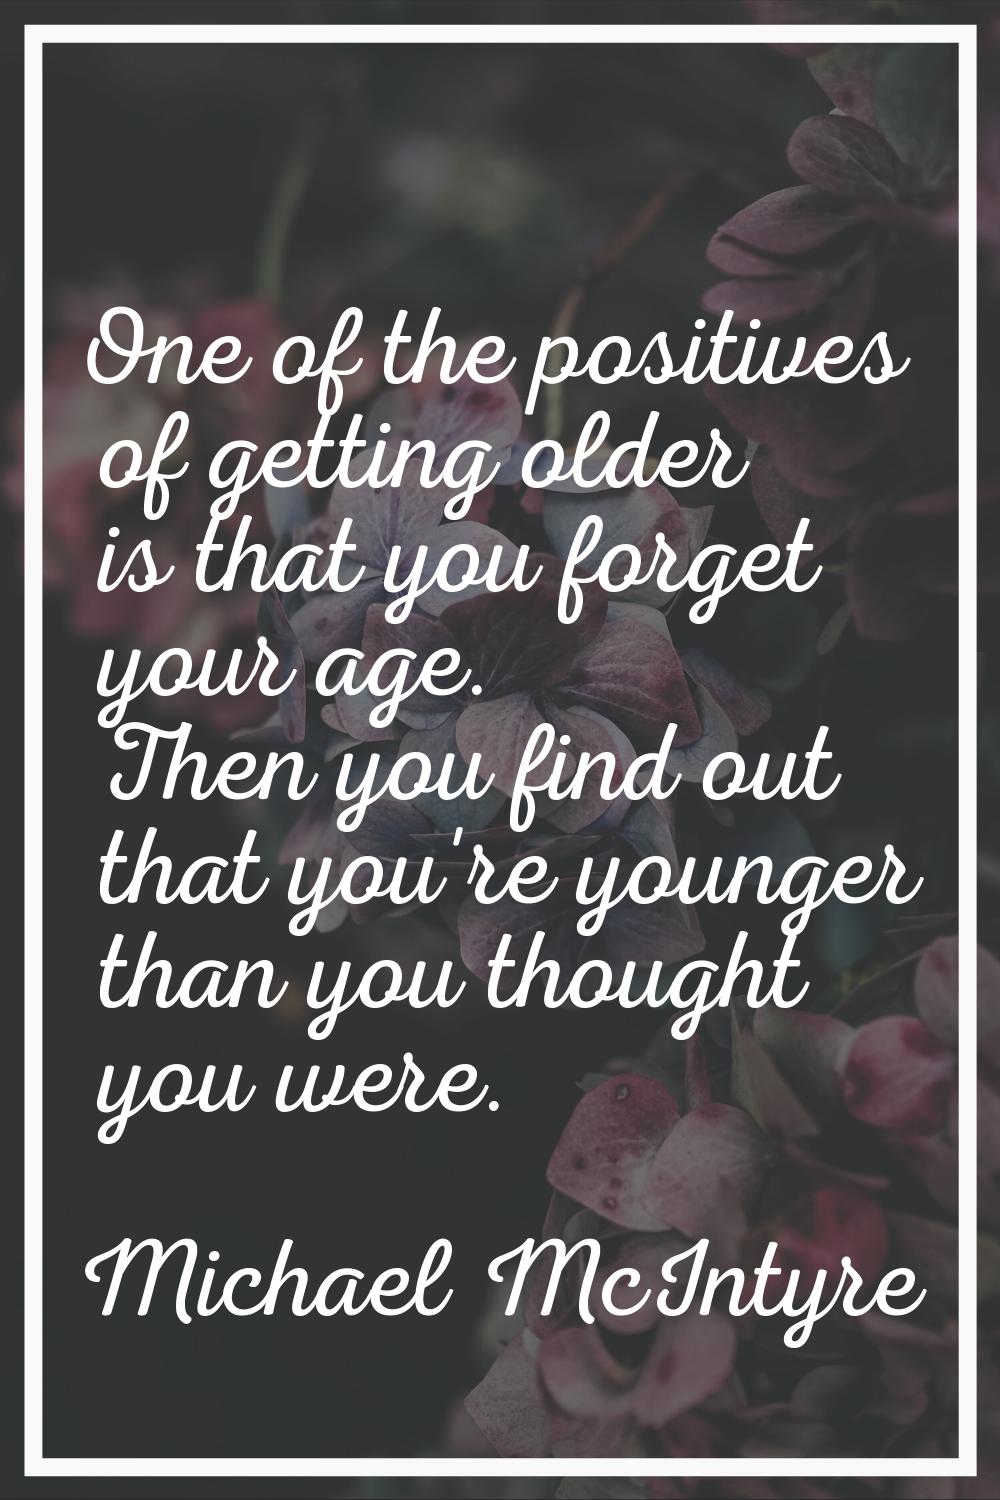 One of the positives of getting older is that you forget your age. Then you find out that you're yo